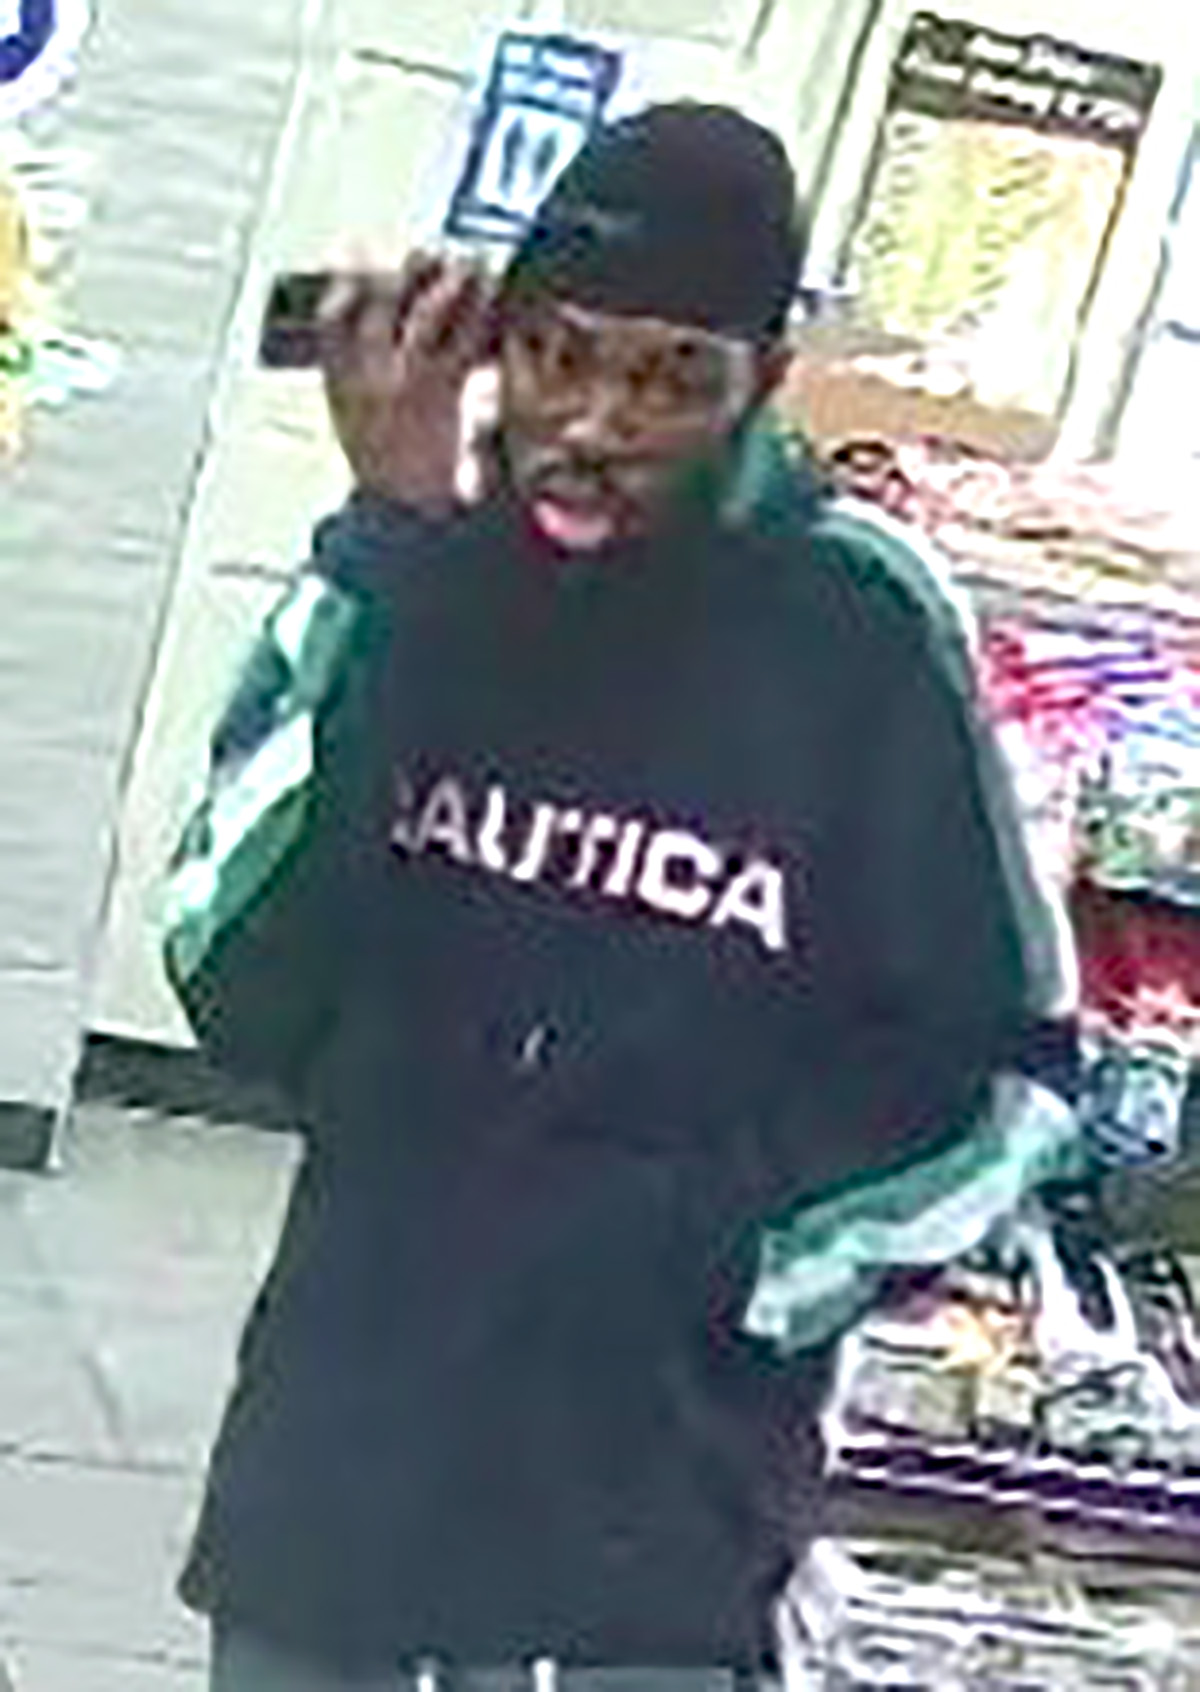 The NYPD is searching for this man in connection with the rape of a 10-year-old girl. -Photo by NYPD